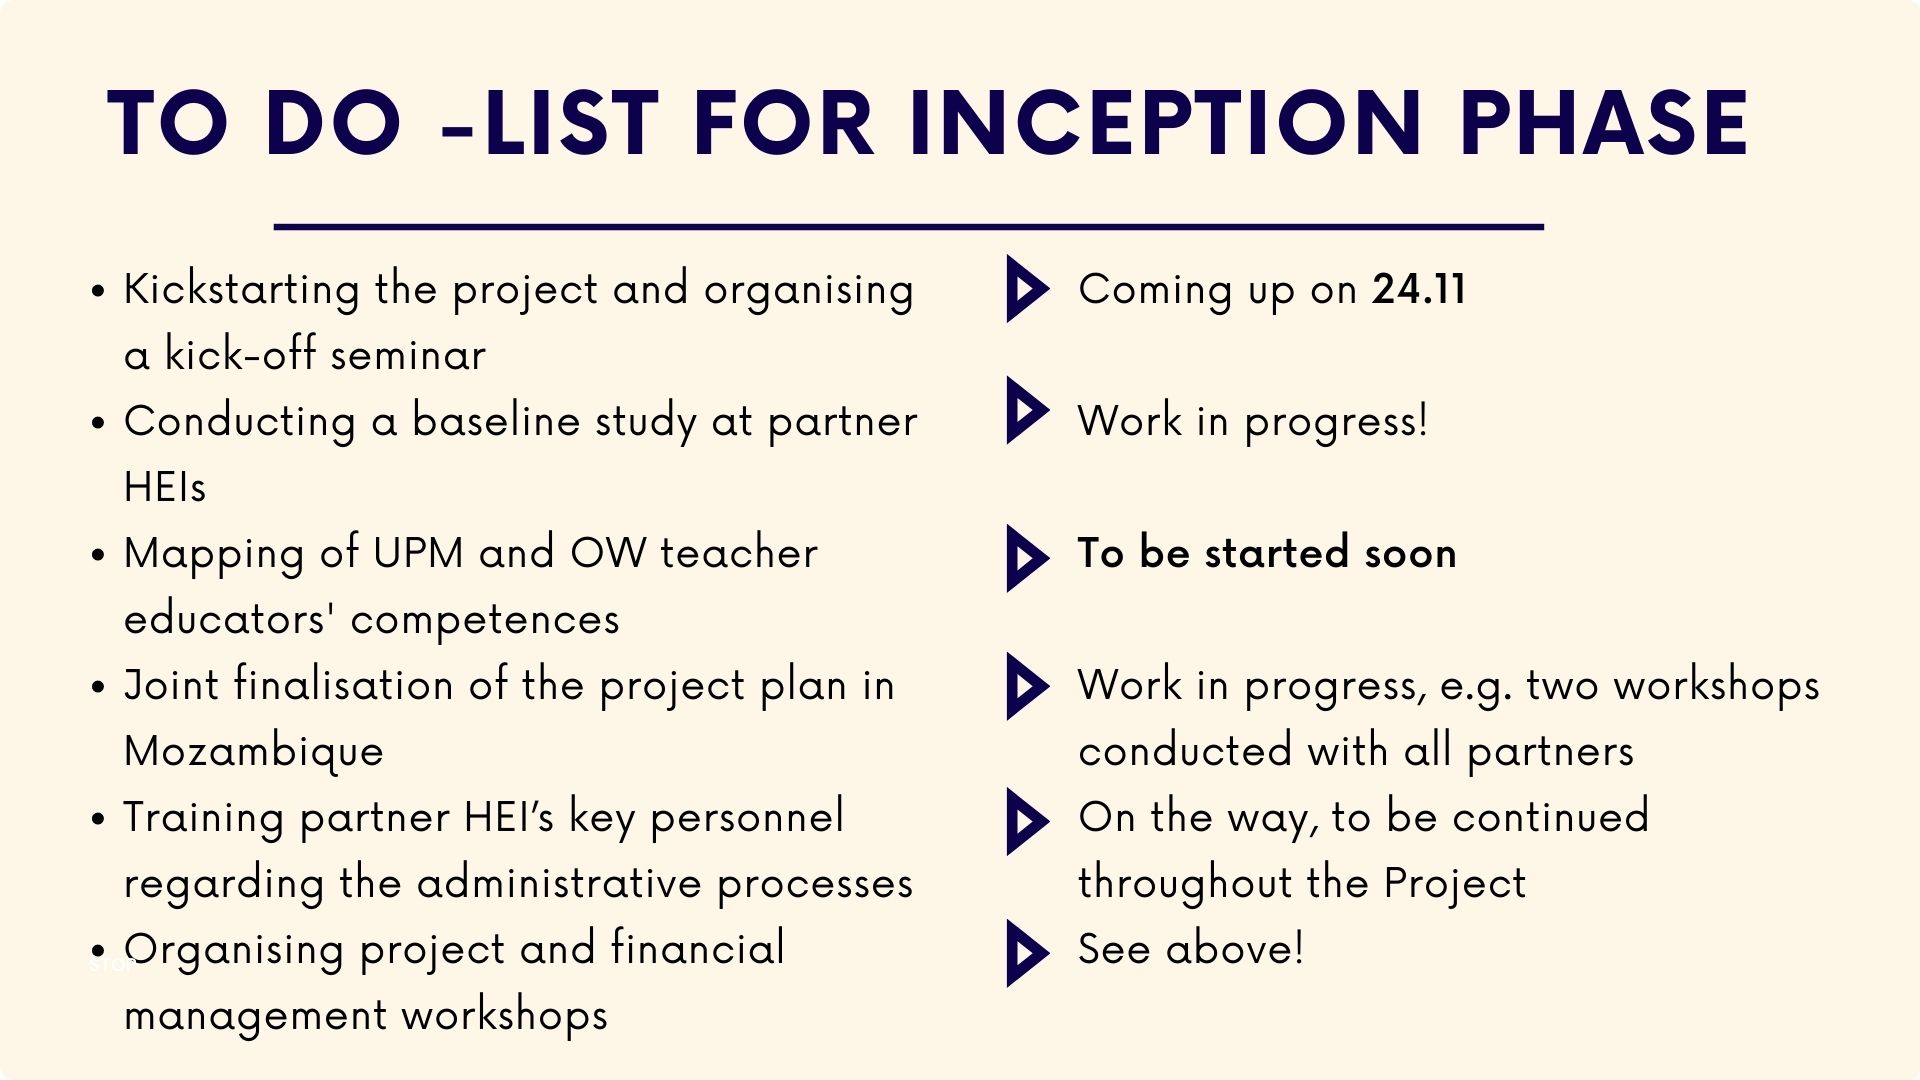 To do list for inception phase: 1) Kickstarting the project and organising a kick-off seminar on 24 November 2) Conducting a baseline study at partner HEIs. Work in progress. 3) Mapping of UPM and OW teacher educators' competences. Will be started soon. 4) Joint finalisation of the project plan in Mozambique. Work in progress. 5) Training partner HEI’s key personnel regarding the administrative processes. On-going, to be continued throughout the project. 6) Organising project and financial management workshops. On-going, to be continued throughout the project.